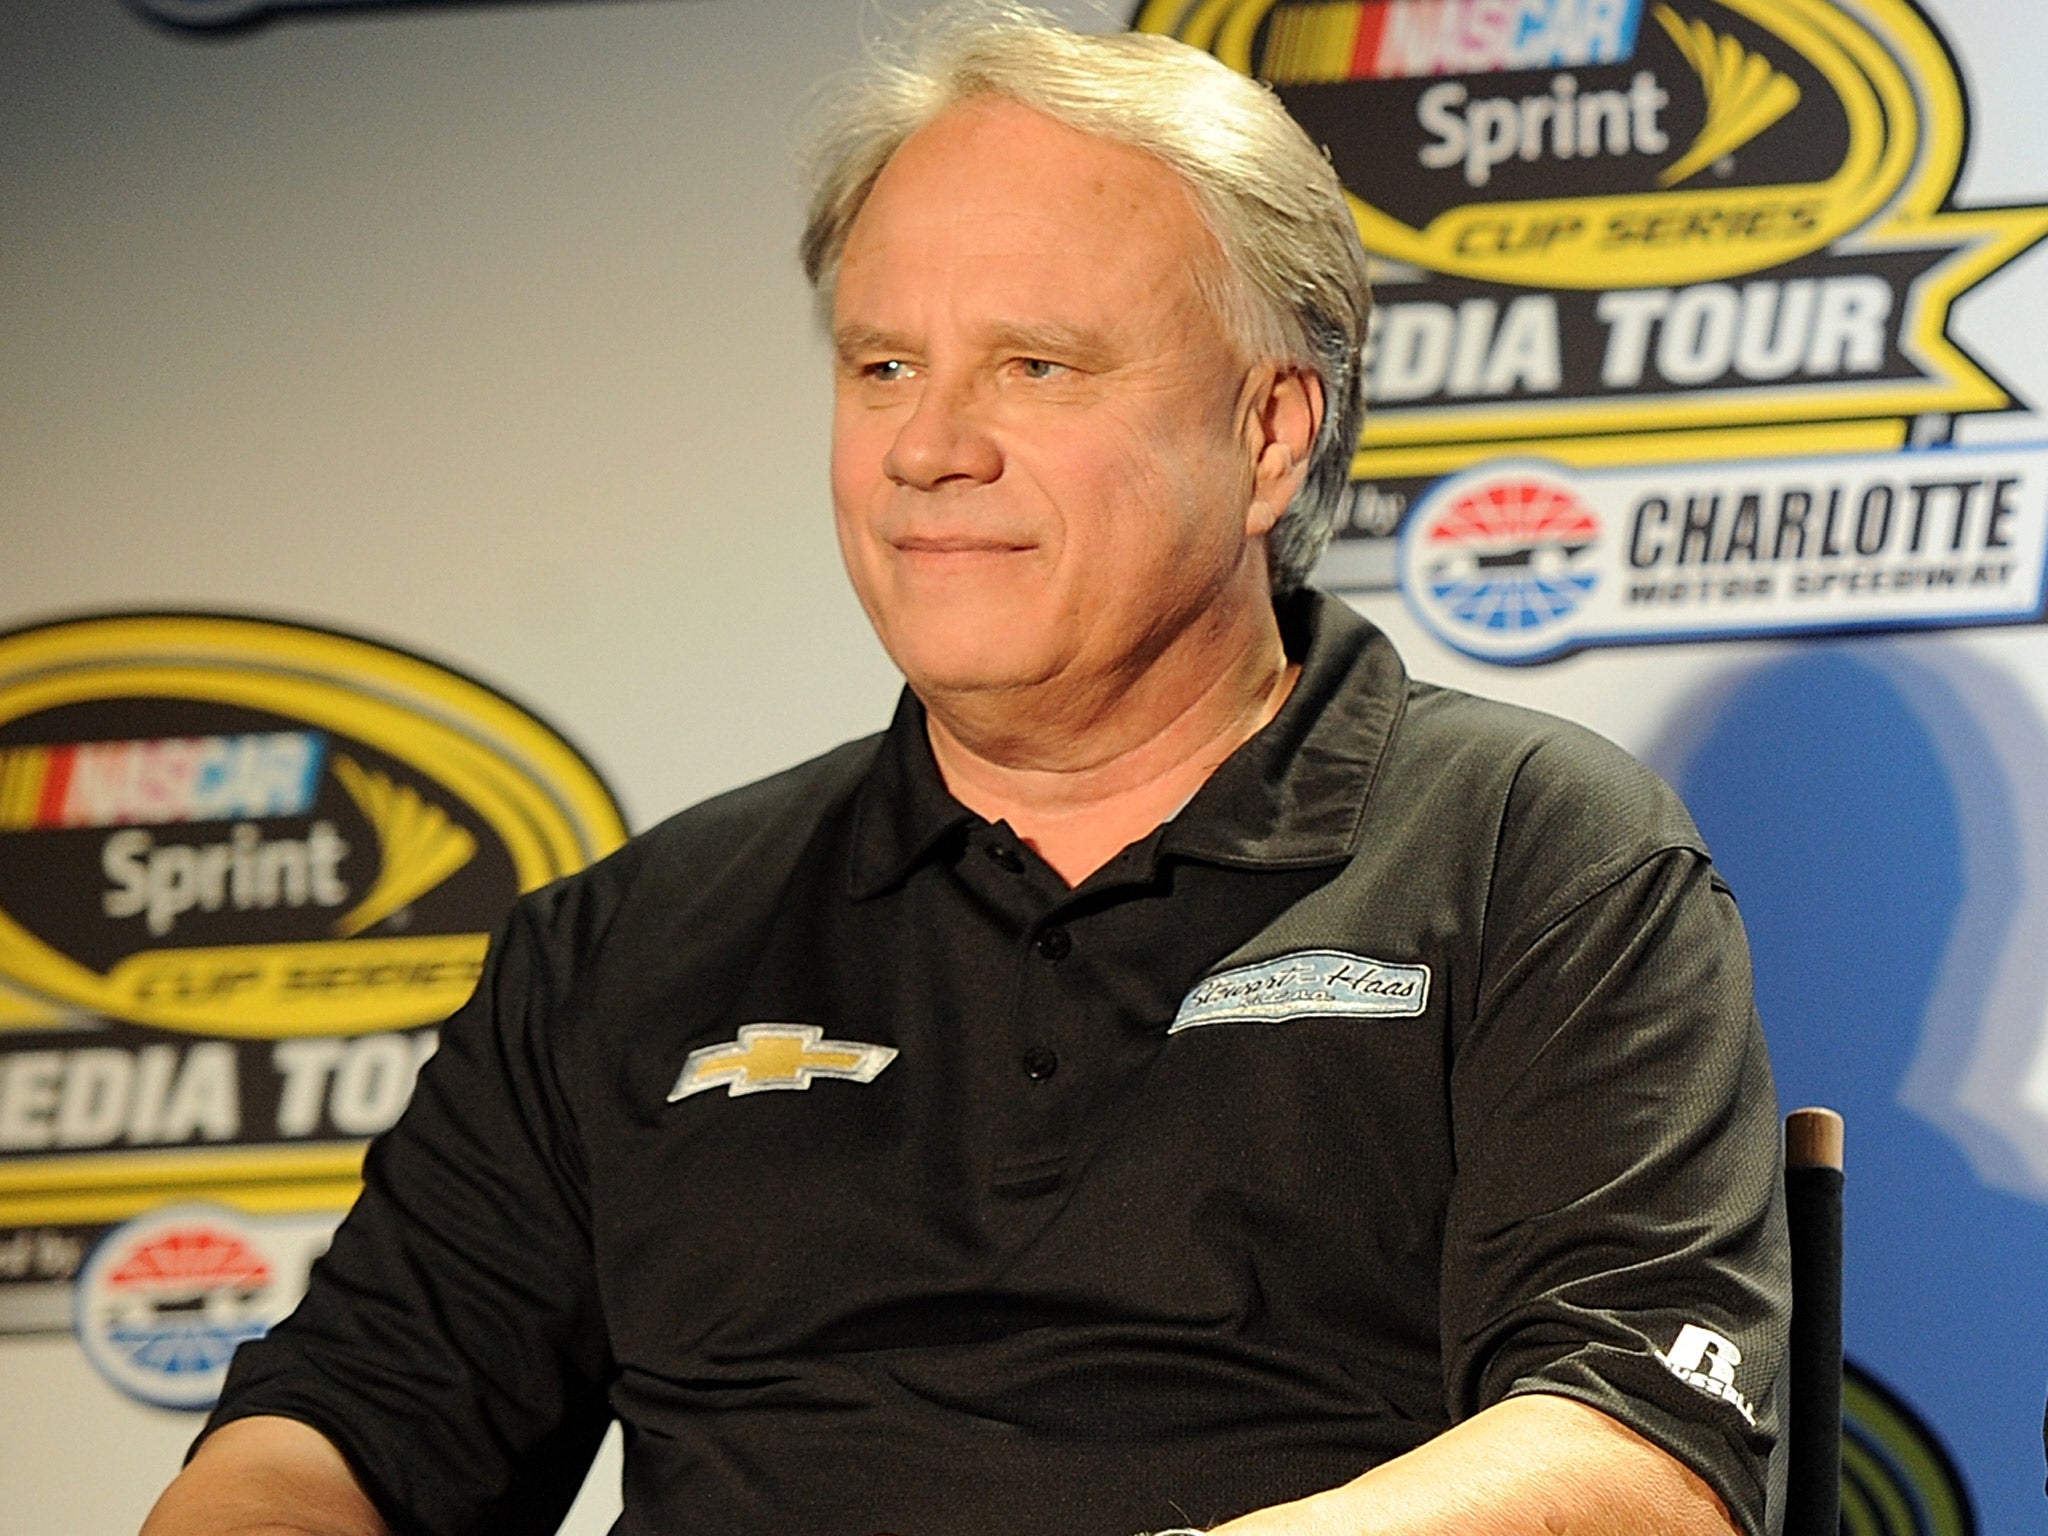 Gene Haas is heavily involved in Nascar, the most popular US motor sport